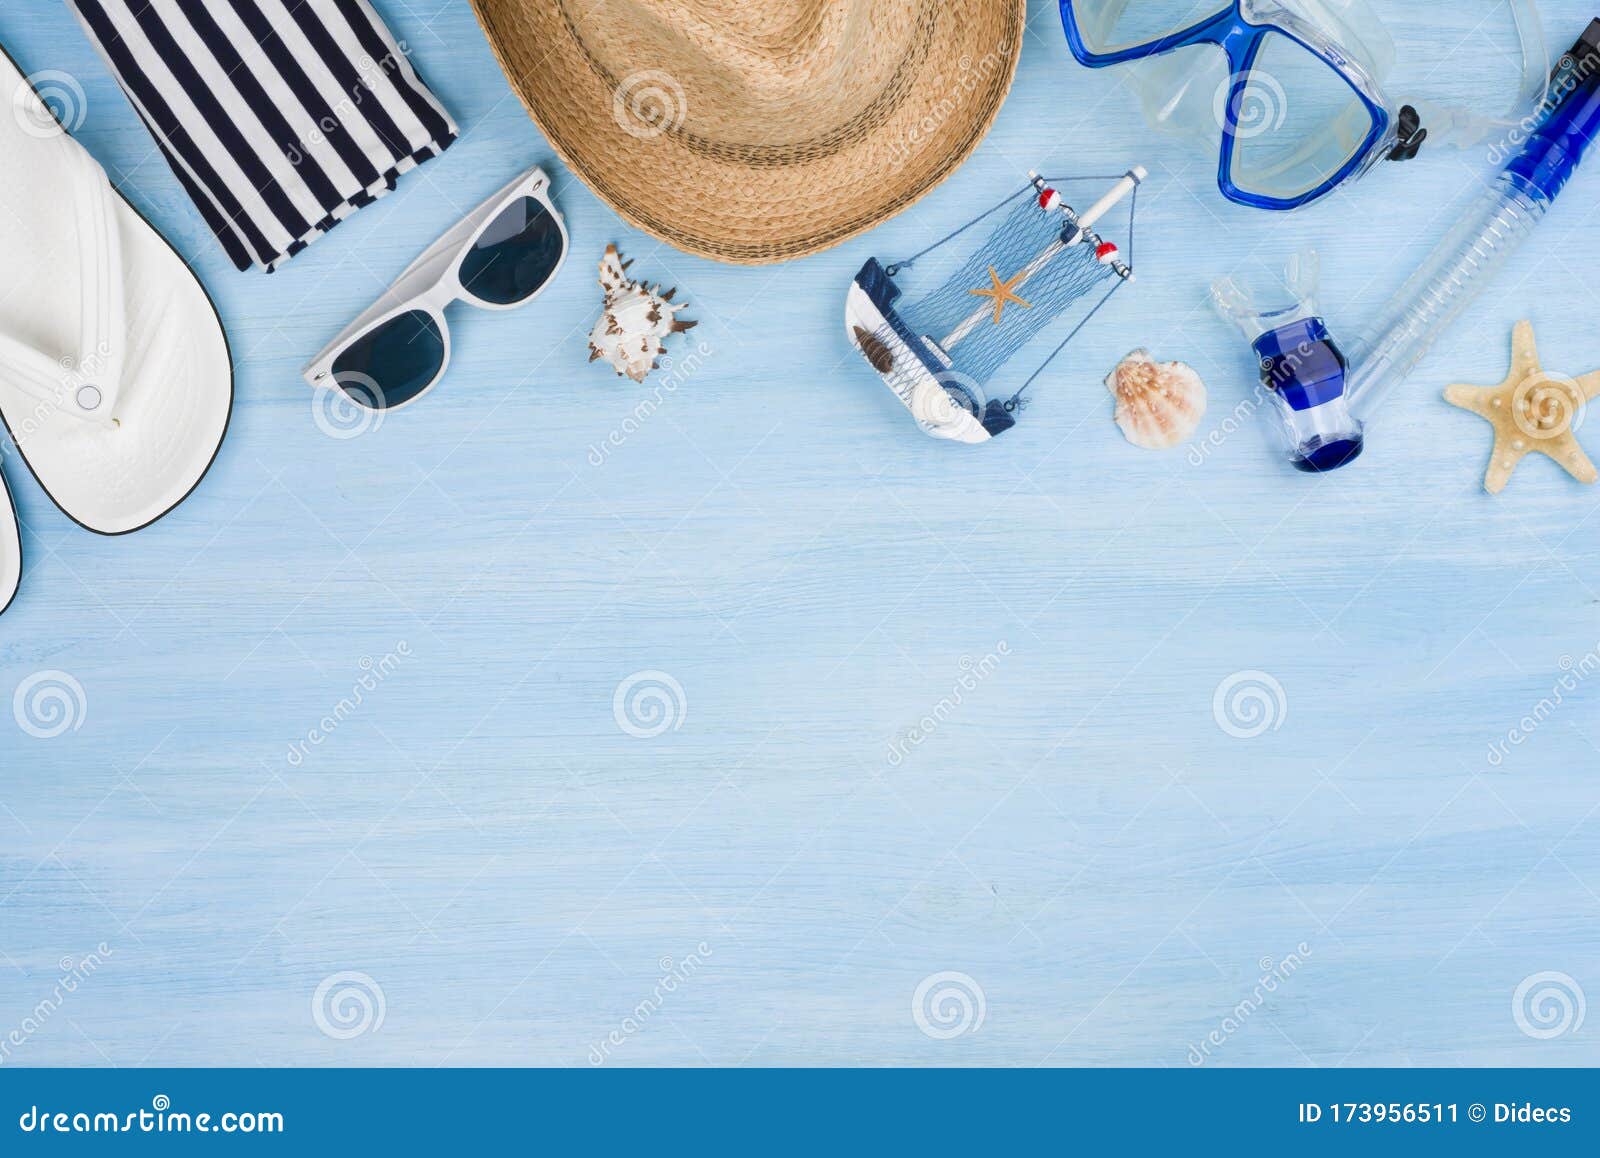 Summer Vacation Concept with Beach Items on Blue Wooden Background ...